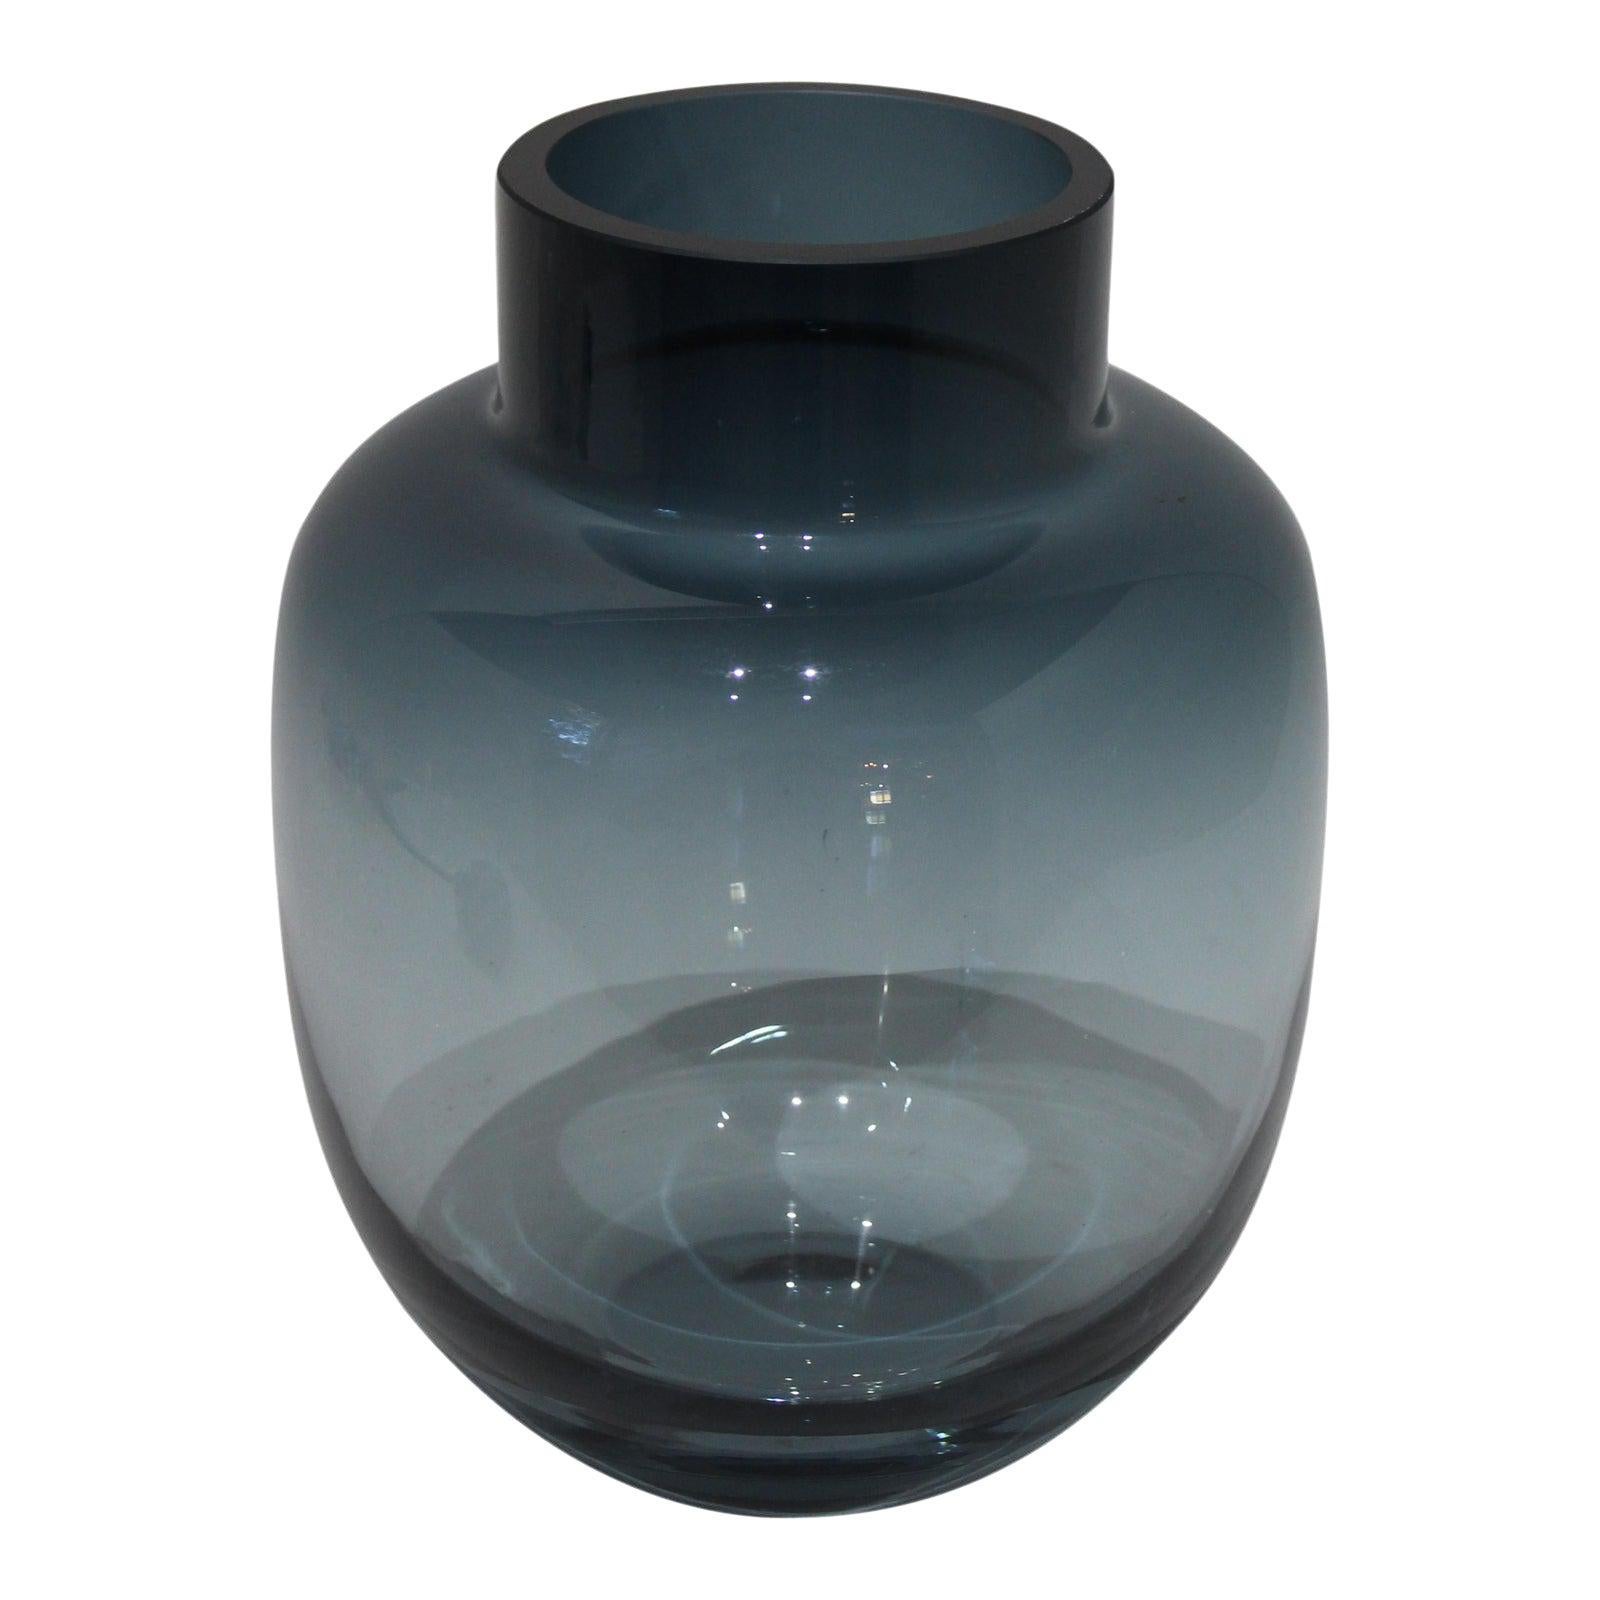 This stylish steel blue colored glass vase dates to the 1960s-1970s and was created by Holmegaard of Denmark.